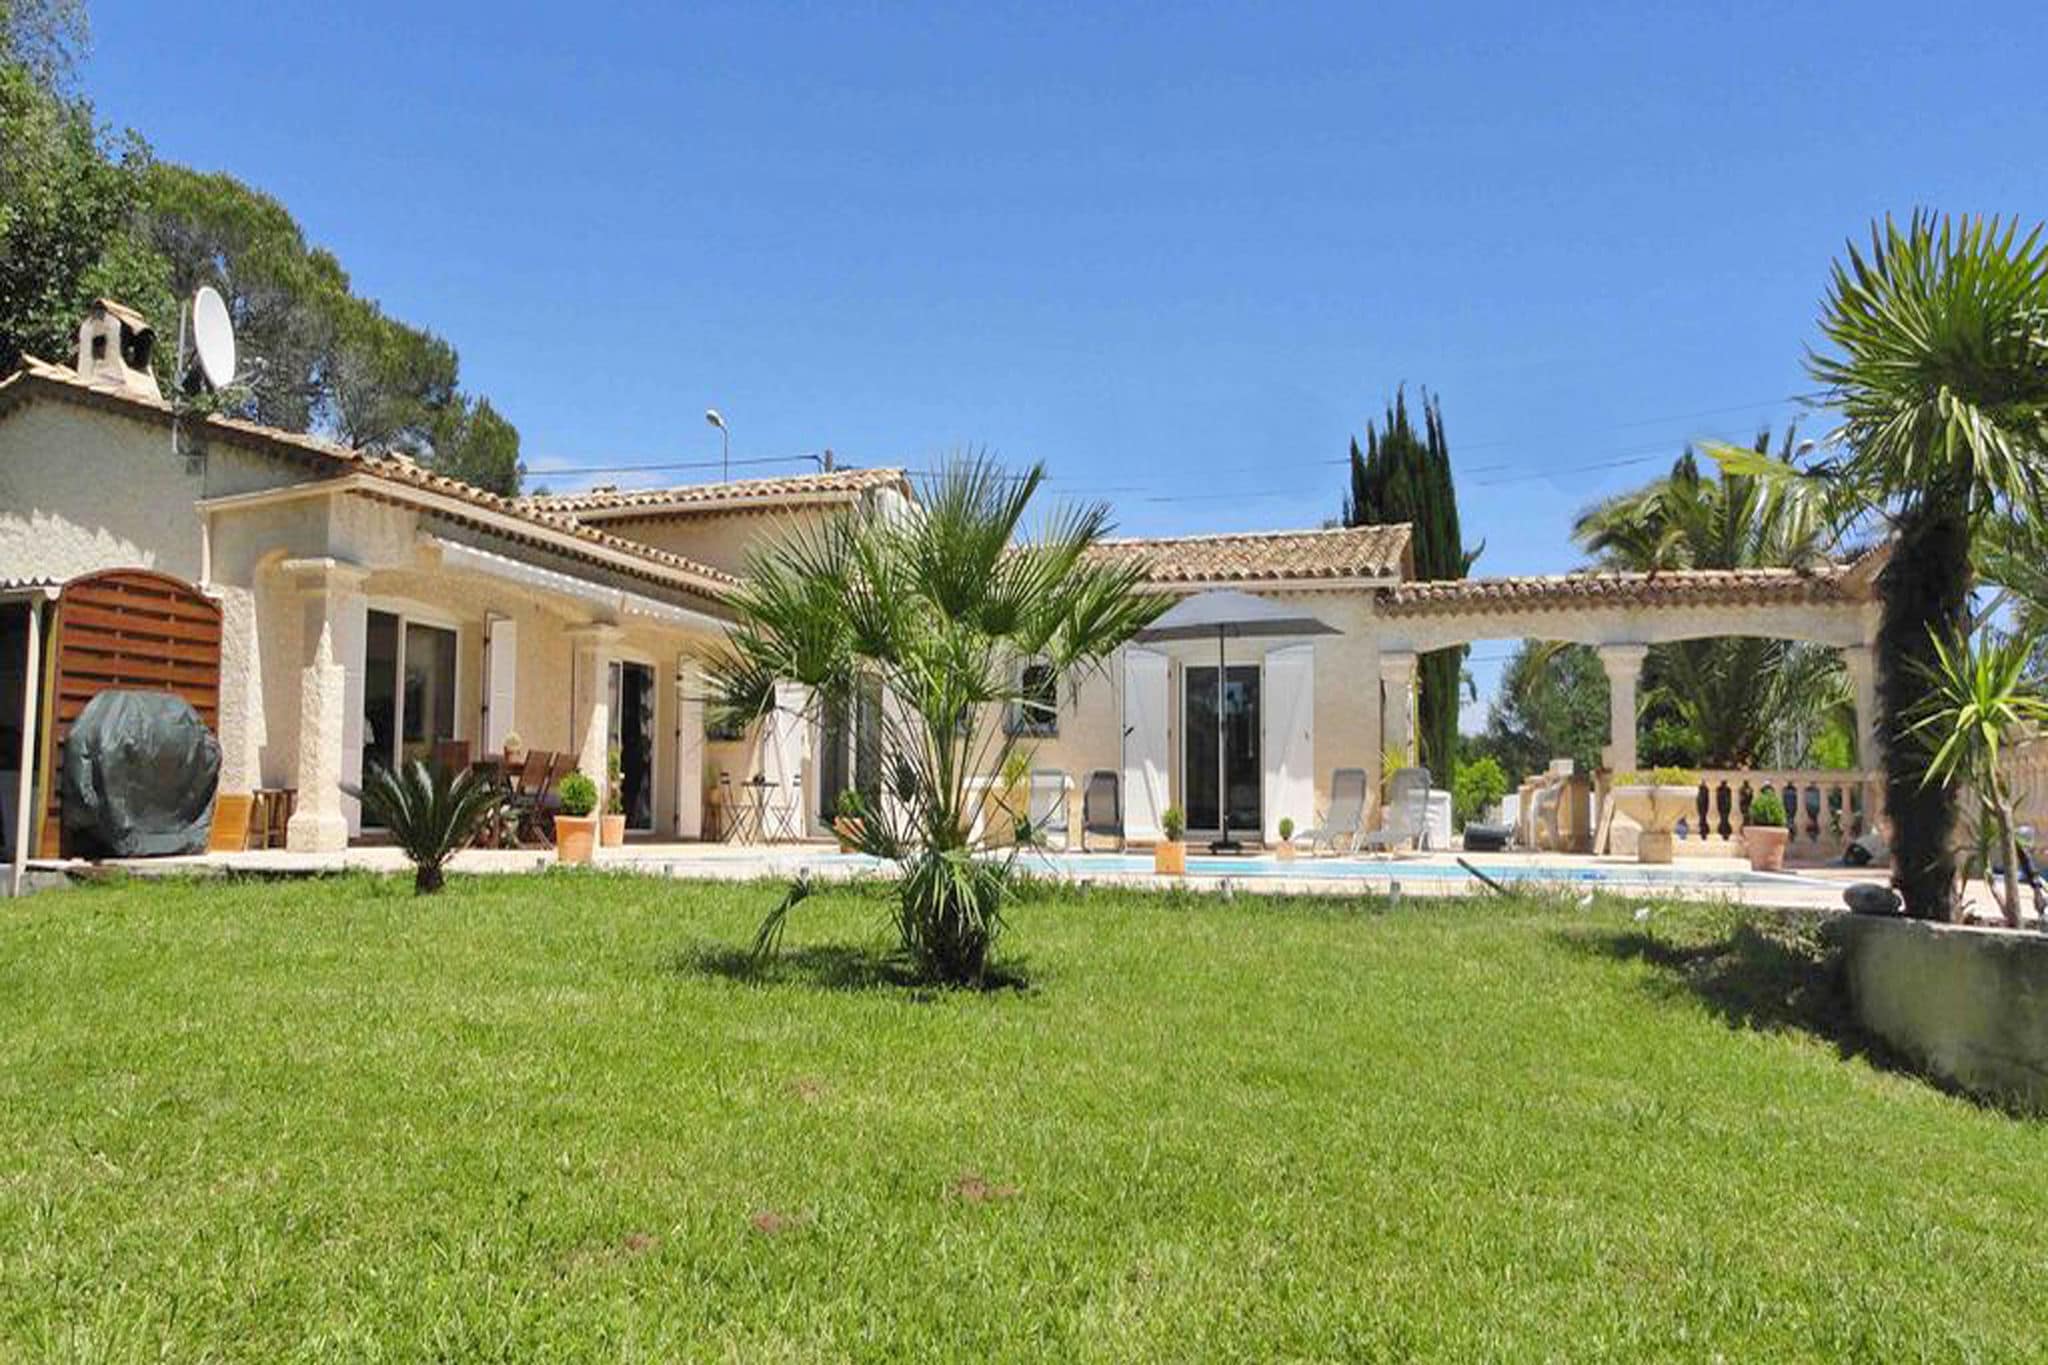 Modern villa in Puget sur Argens with private pool